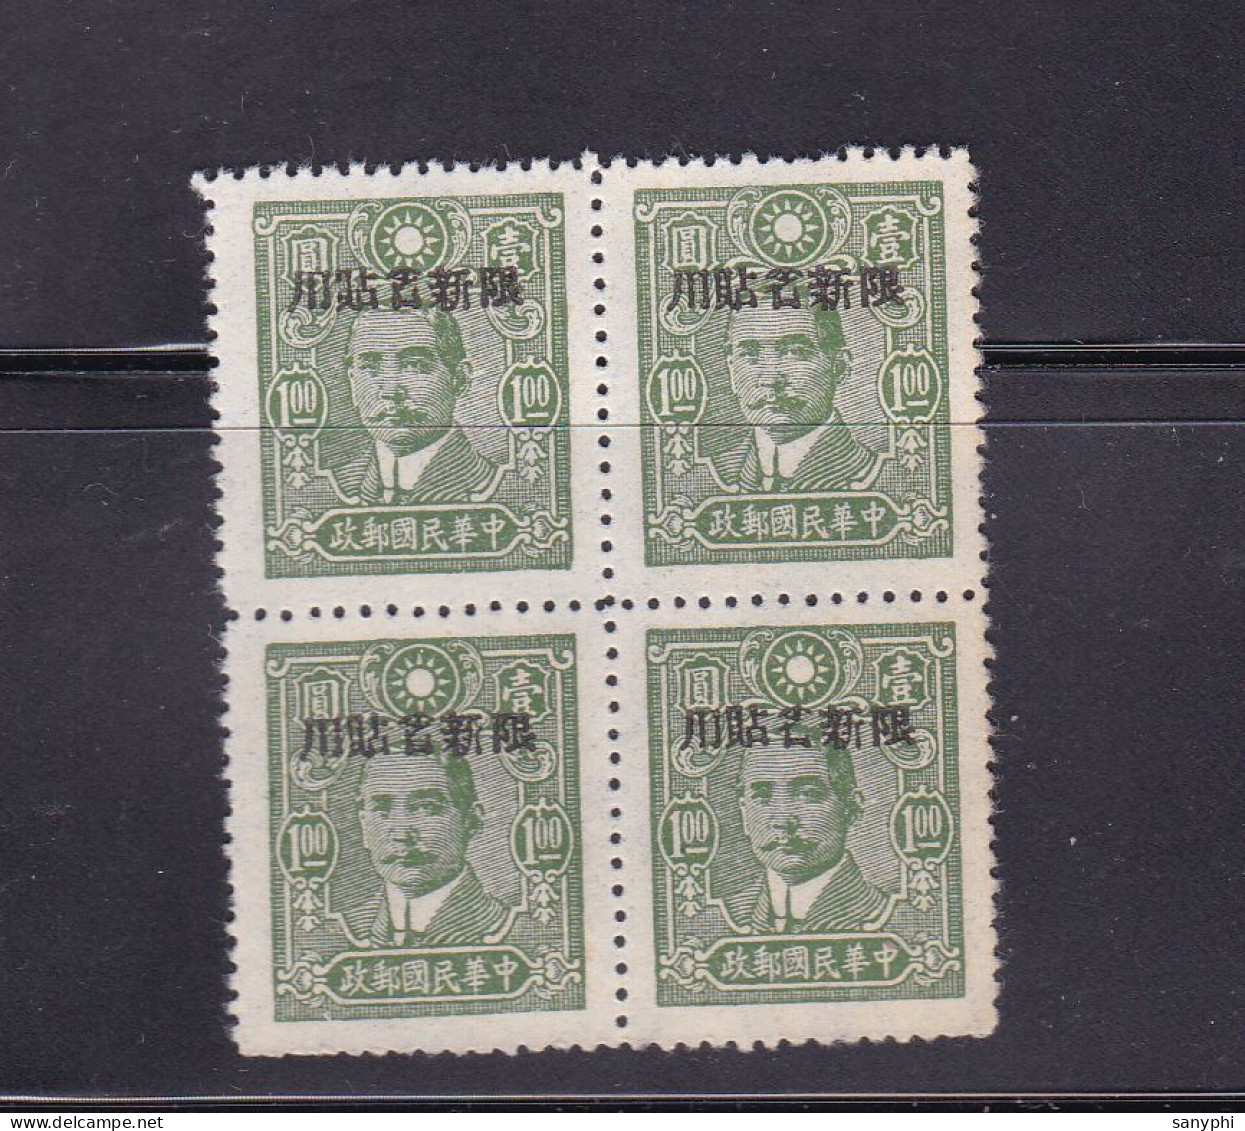 China Chine Dr Sun Ovpt Sinking On 1 Dollars BLK 4 (third Overprint In Black) - 1912-1949 Republic